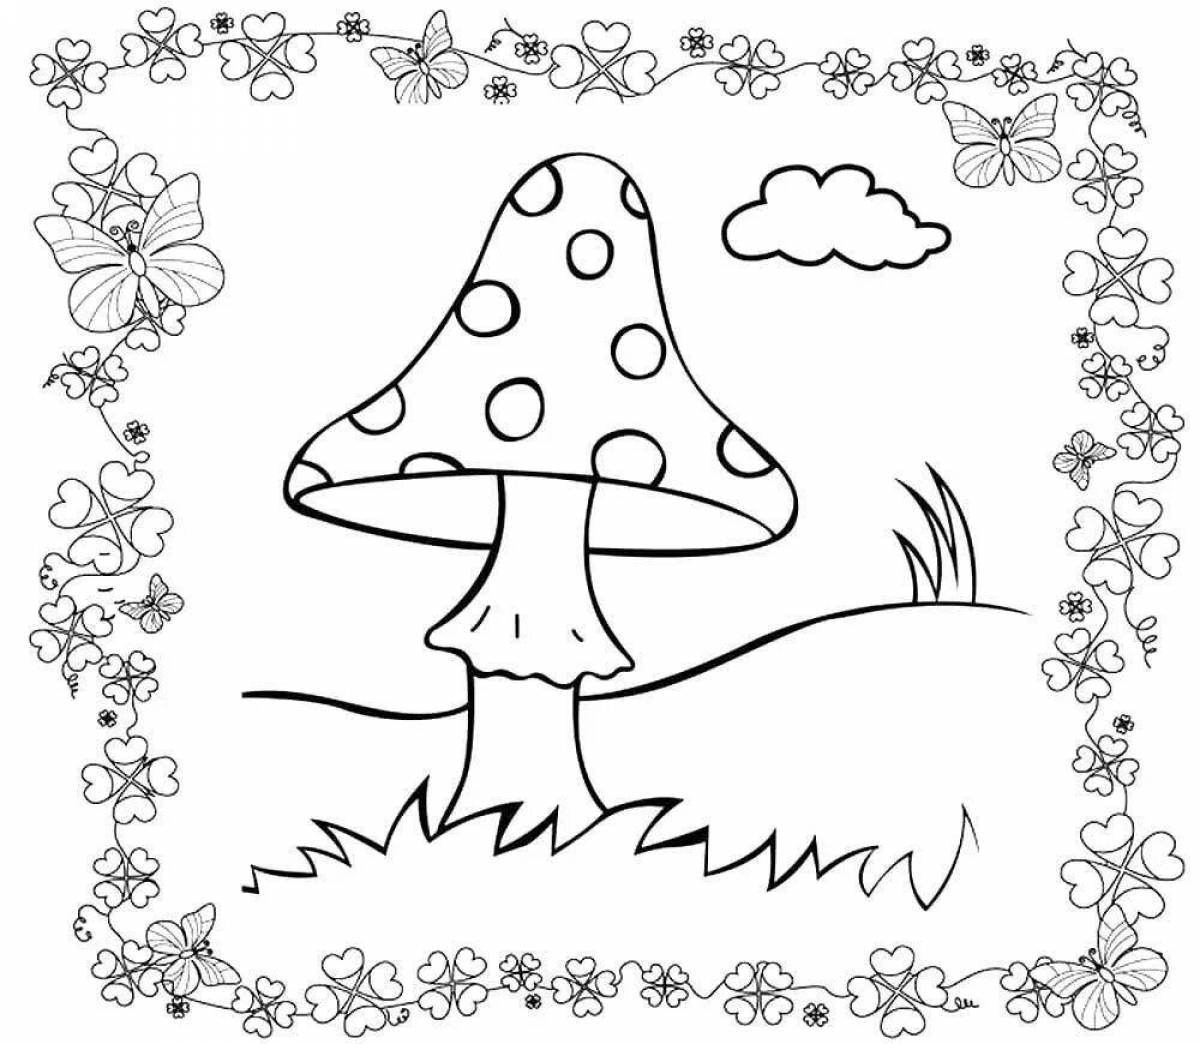 Impressive fly agaric coloring book